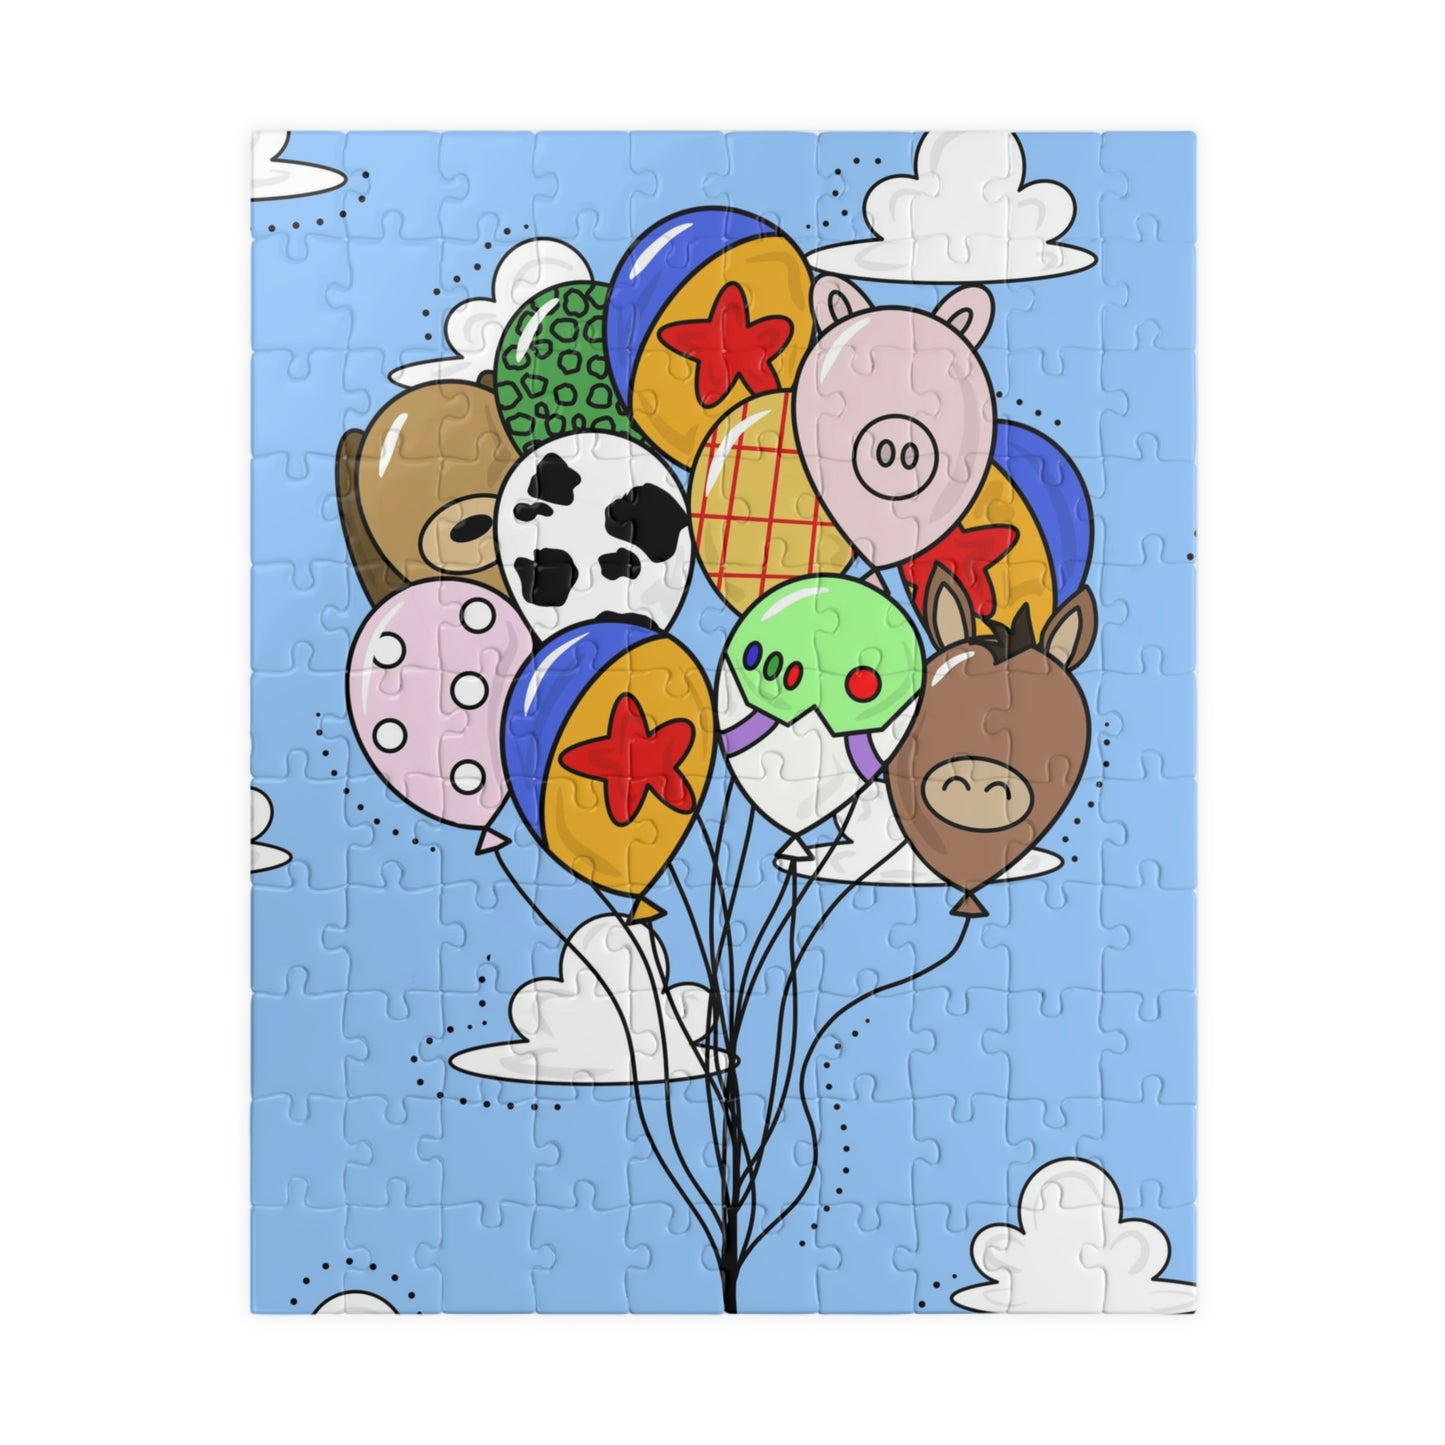 Toy Balloons Puzzle